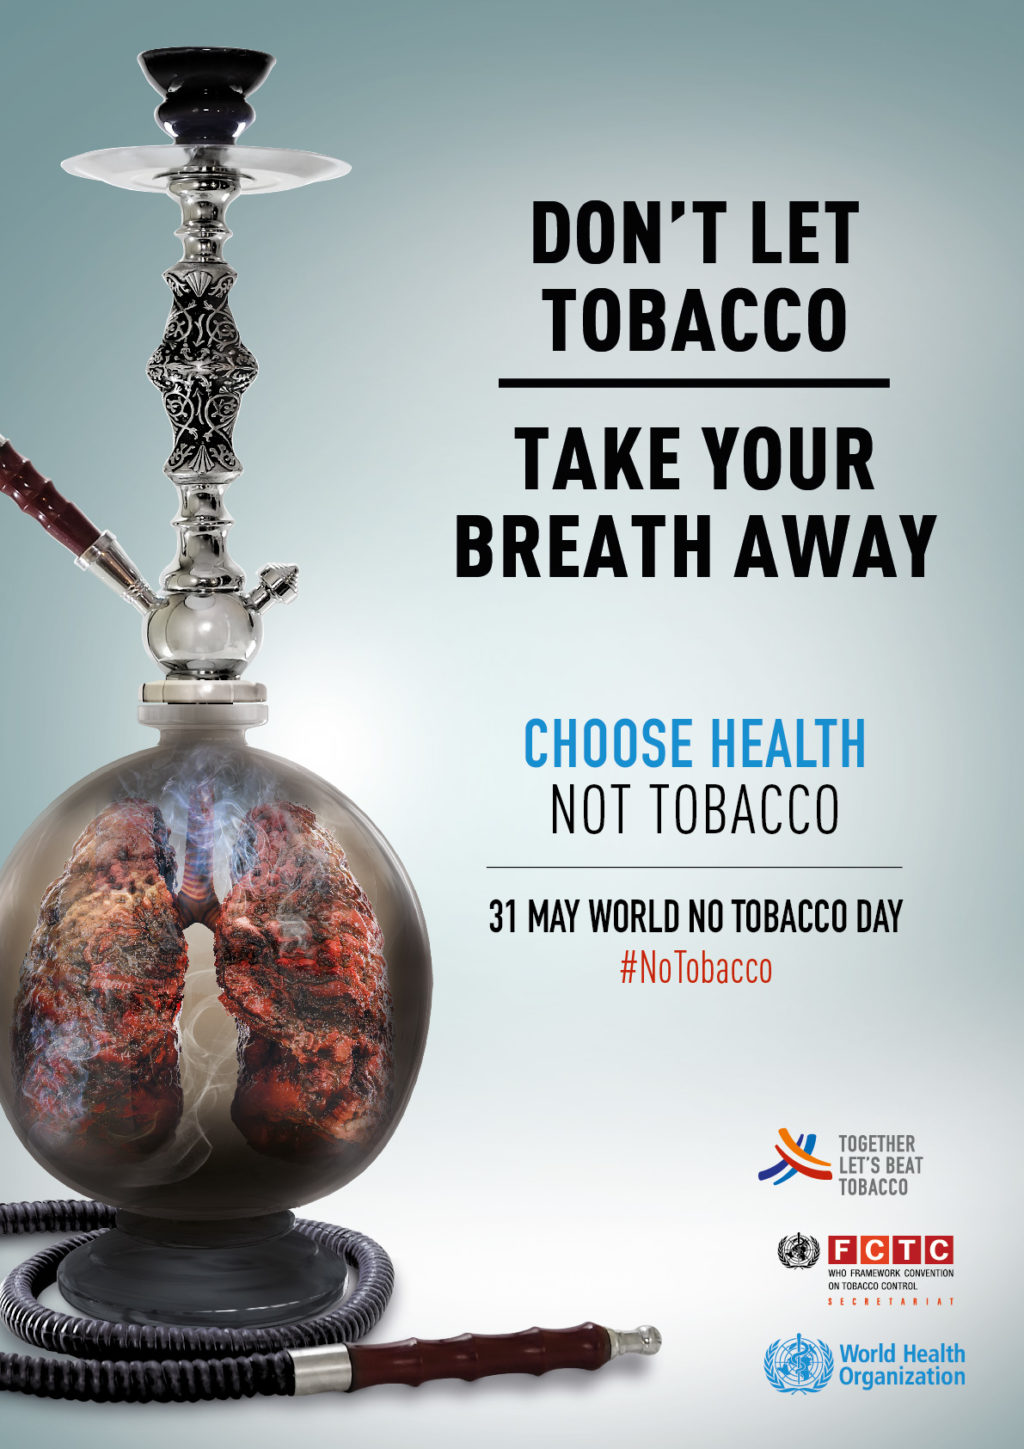 What should take your breath away? #NeverTobacco